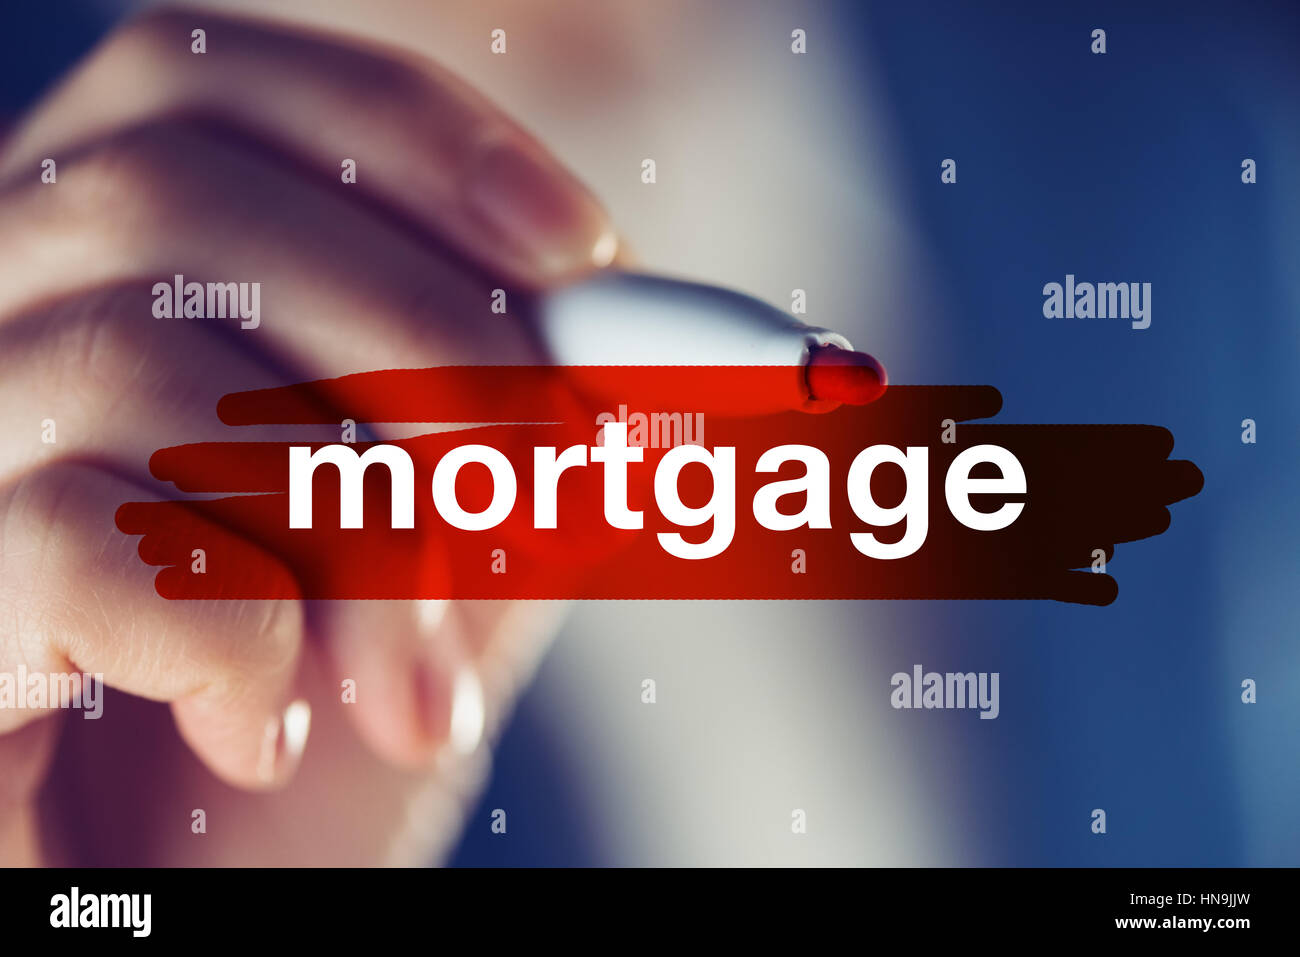 Business mortgage concept, businesswoman highlighting word with red marker pen Stock Photo